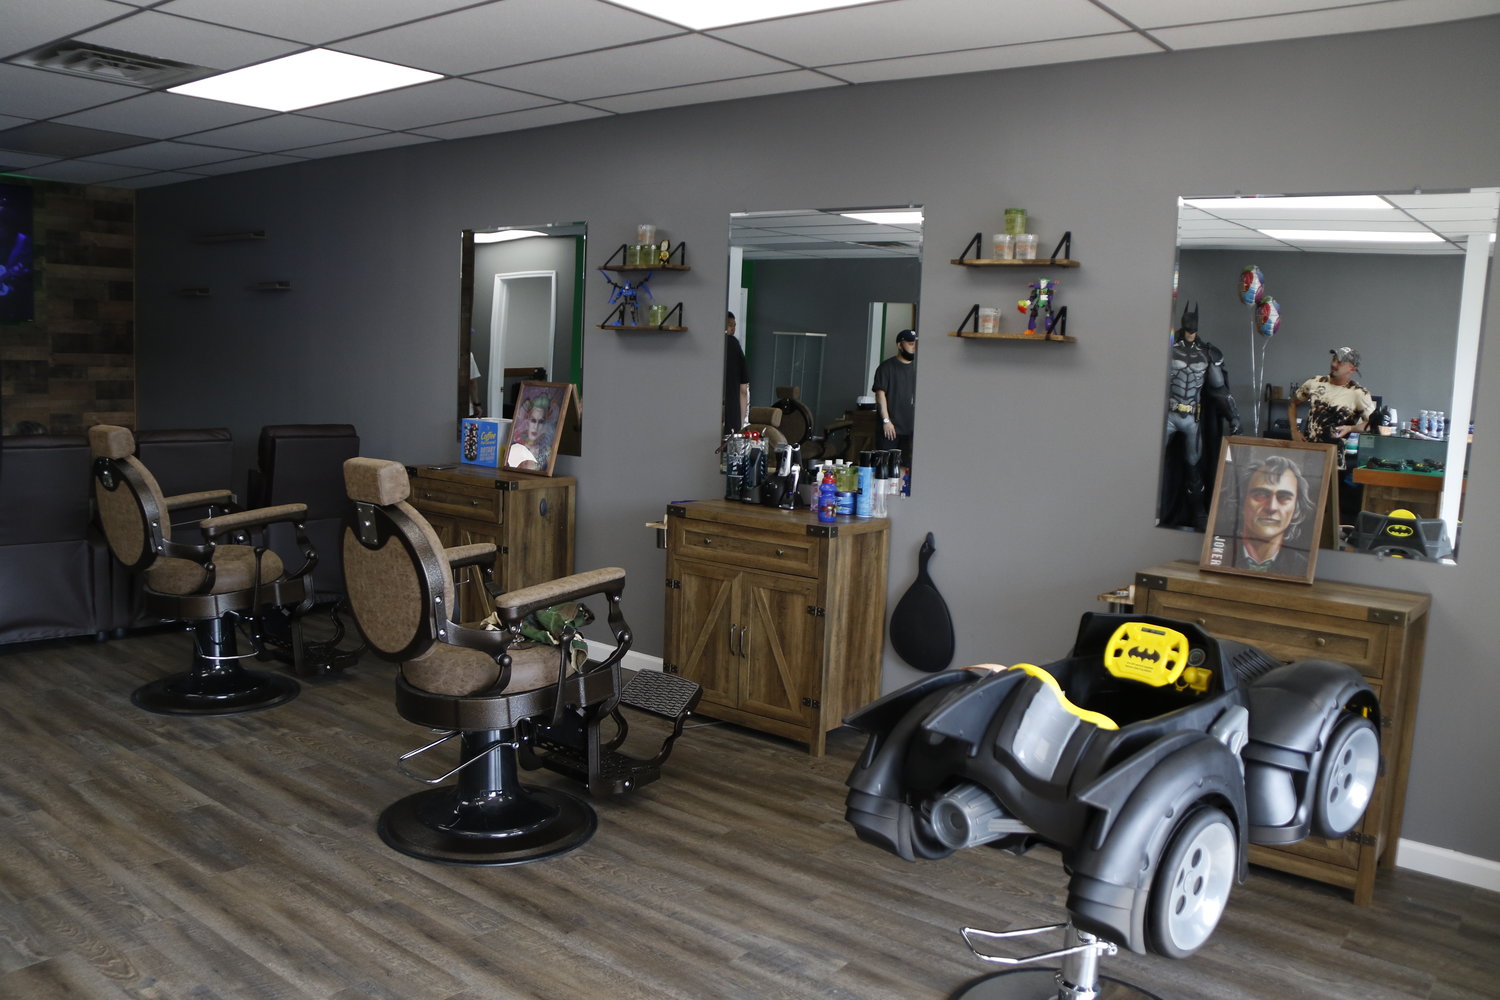 The barbershop features many comic book characters for children of all ages.